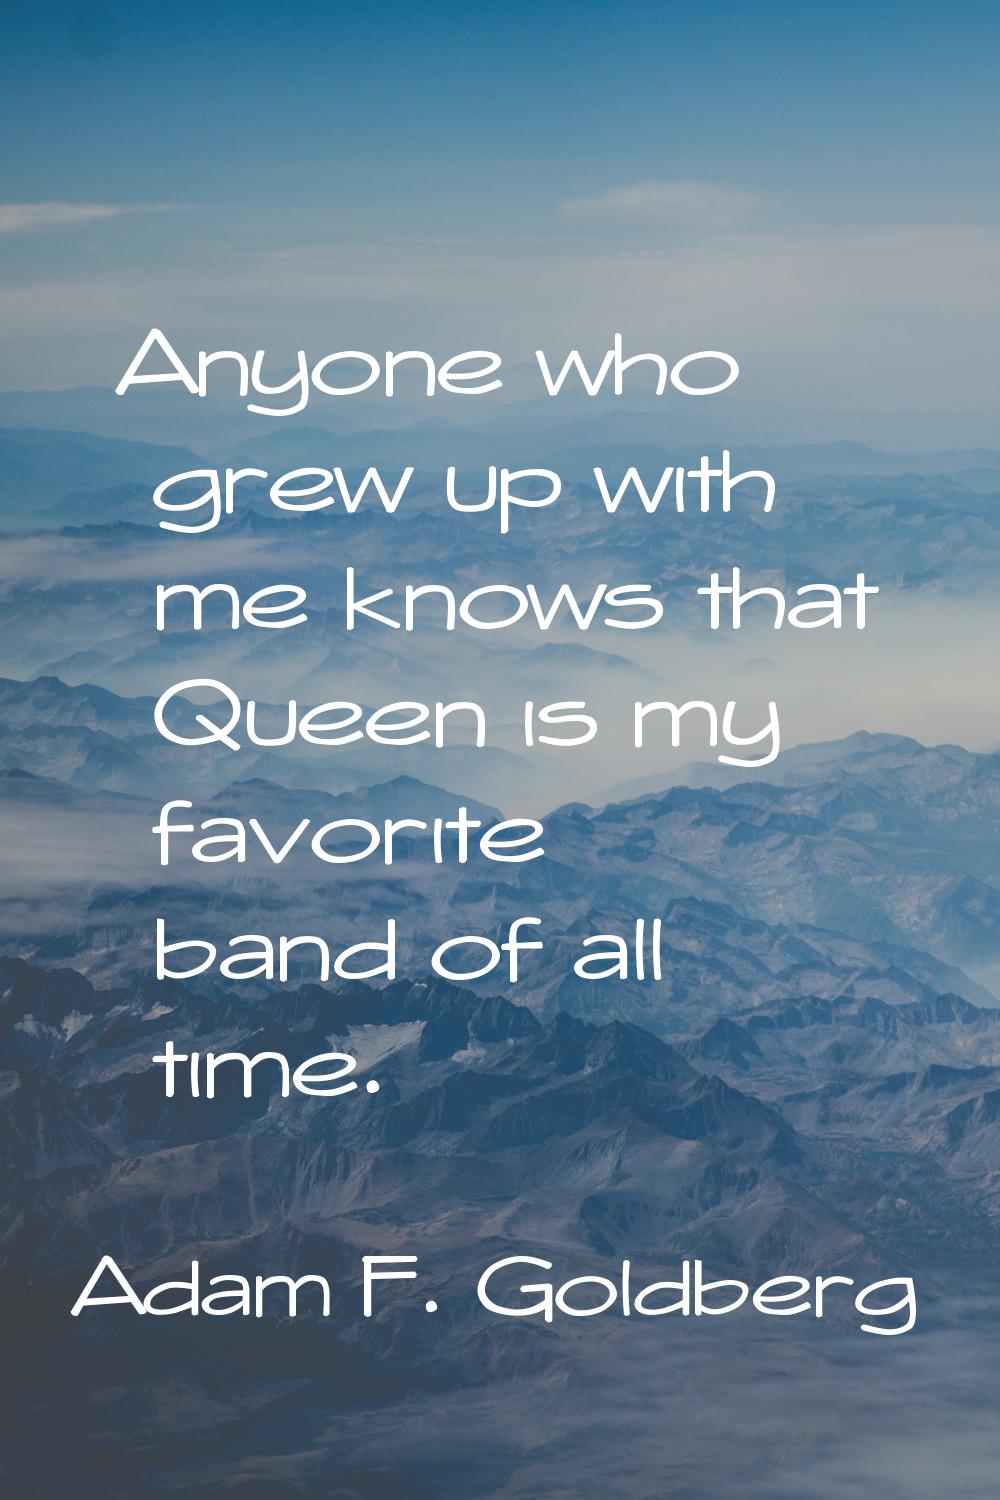 Anyone who grew up with me knows that Queen is my favorite band of all time.